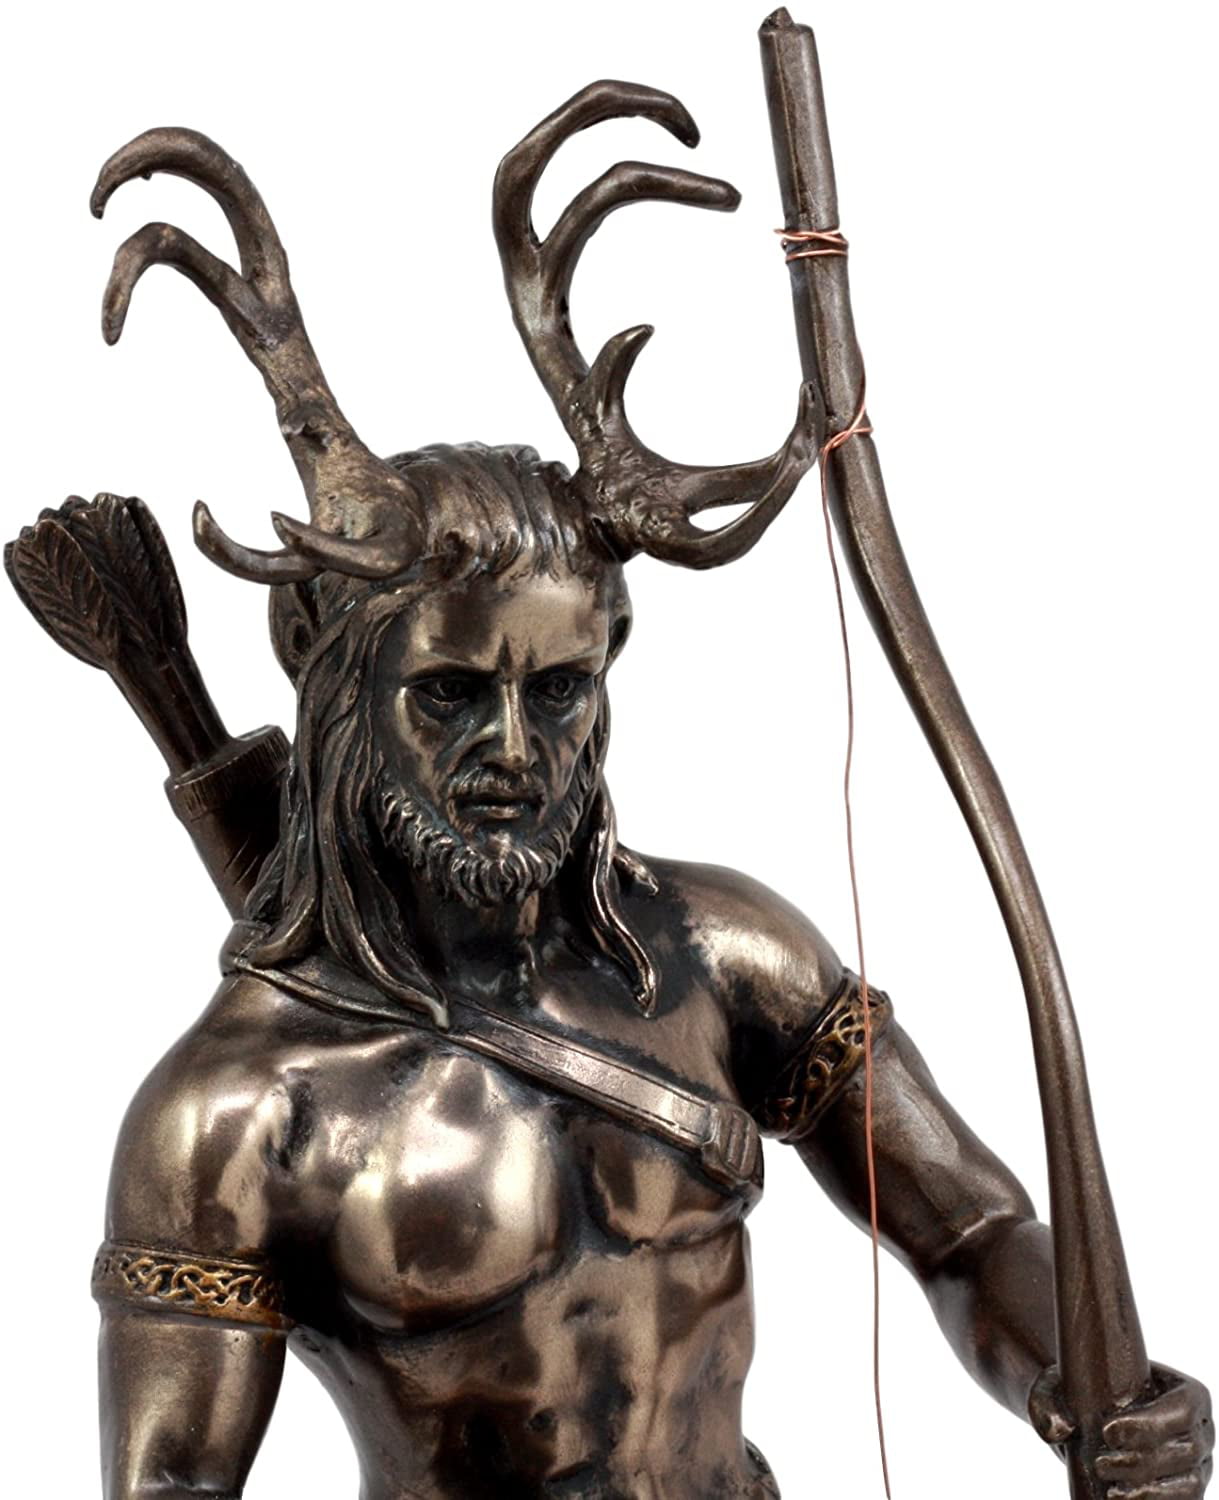 Ebros Celtic Pagan God Herne The Hunter Statue 11" Tall in Bronze Patina Finish 